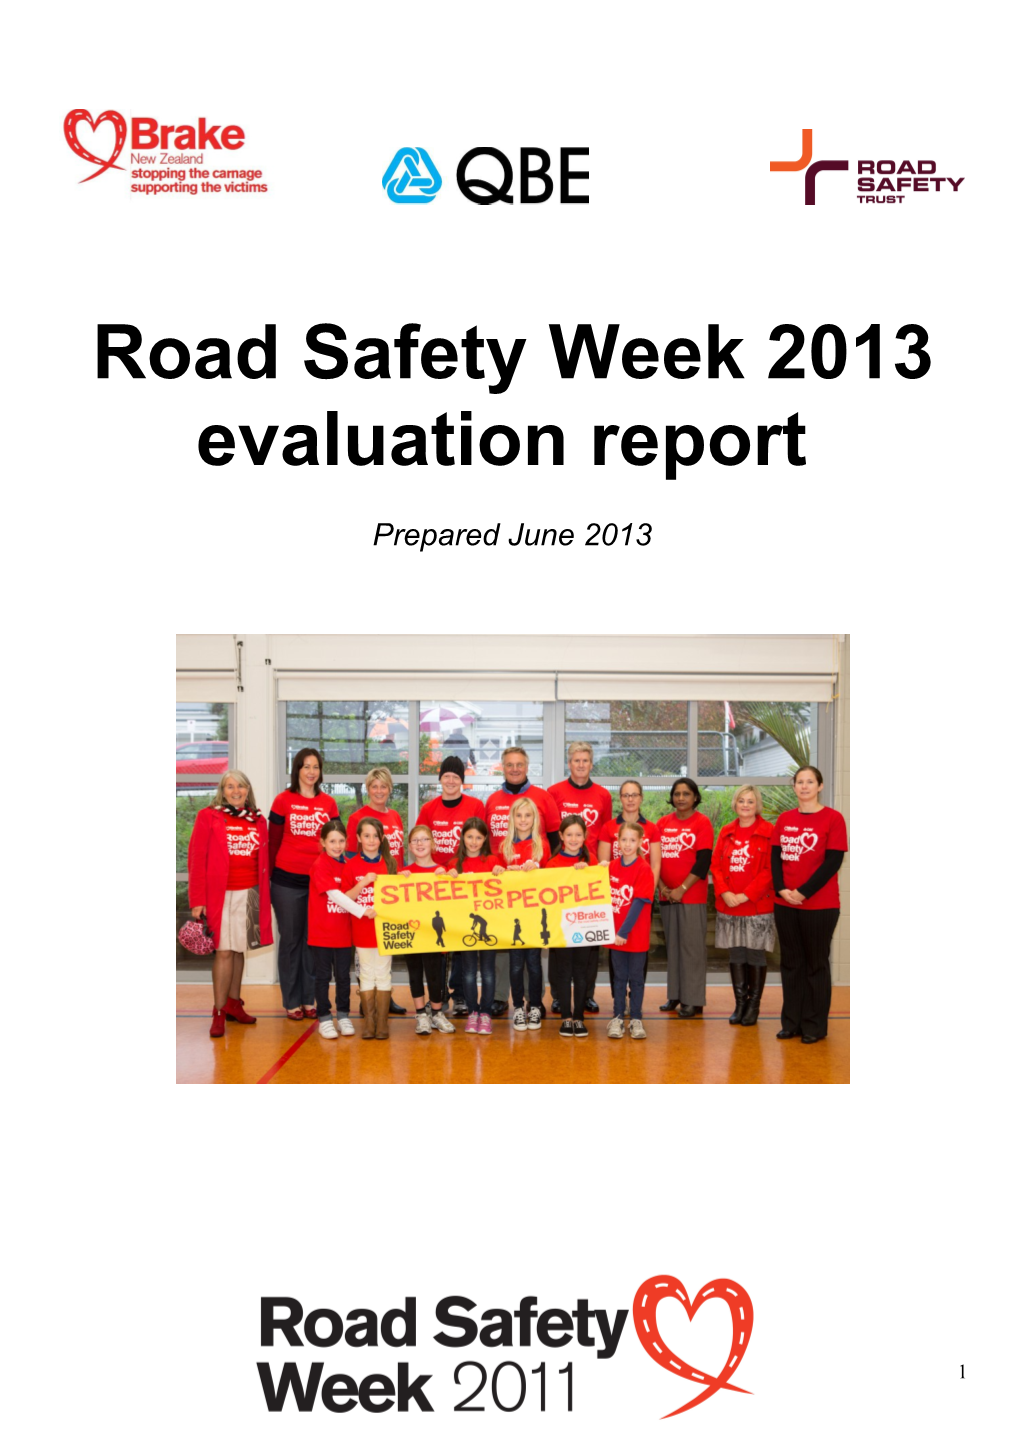 Summary of Road Safety Week 2003 Achievements